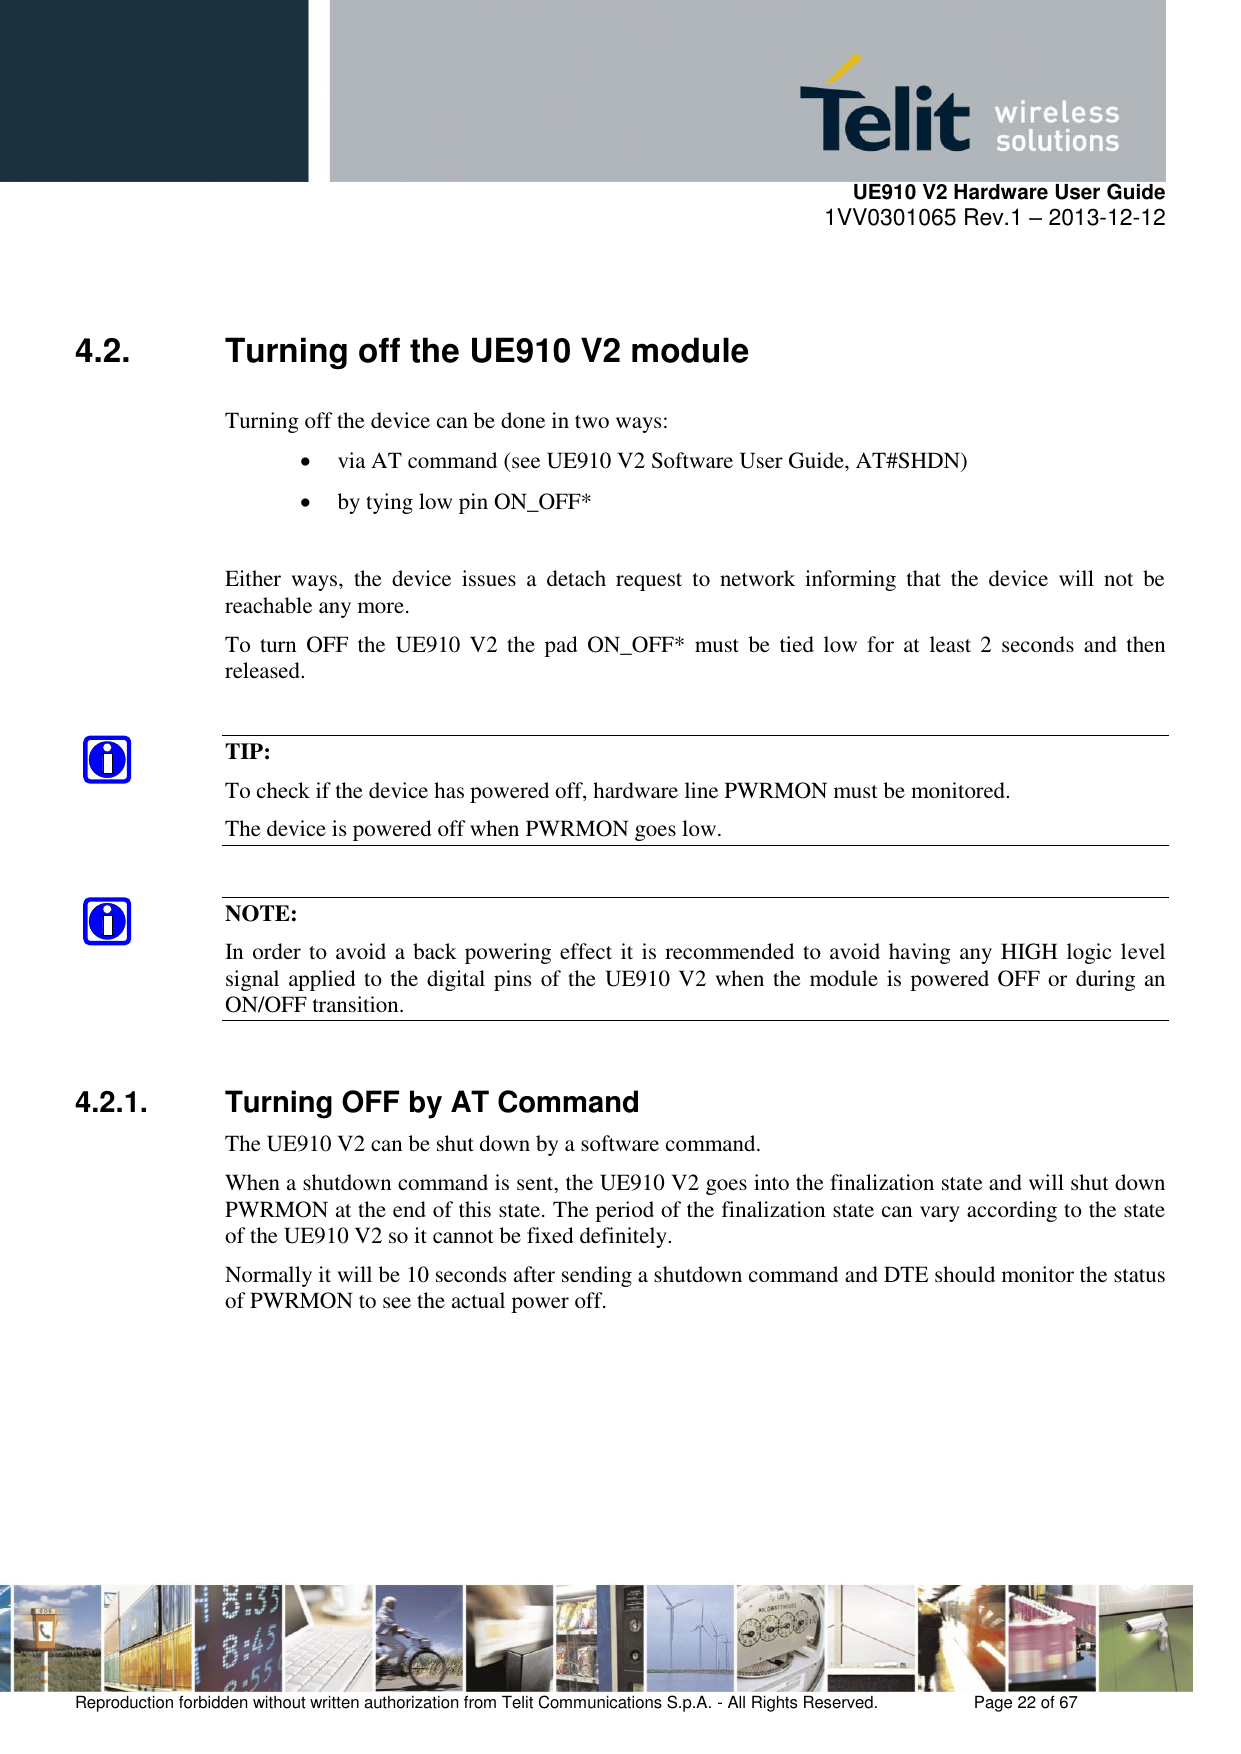     UE910 V2 Hardware User Guide 1VV0301065 Rev.1 – 2013-12-12  Reproduction forbidden without written authorization from Telit Communications S.p.A. - All Rights Reserved.    Page 22 of 67                                                      4.2.  Turning off the UE910 V2 module Turning off the device can be done in two ways:  via AT command (see UE910 V2 Software User Guide, AT#SHDN)  by tying low pin ON_OFF*  Either  ways,  the  device  issues  a  detach  request  to  network  informing  that  the  device  will  not  be reachable any more. To  turn  OFF  the  UE910  V2 the  pad  ON_OFF*  must  be  tied  low  for  at  least 2  seconds and  then released.  TIP: To check if the device has powered off, hardware line PWRMON must be monitored.  The device is powered off when PWRMON goes low.  NOTE: In order to avoid a back powering effect it is recommended to avoid having any HIGH logic level signal applied to the digital pins of the UE910 V2 when the module is powered OFF or during an ON/OFF transition.  4.2.1.  Turning OFF by AT Command The UE910 V2 can be shut down by a software command. When a shutdown command is sent, the UE910 V2 goes into the finalization state and will shut down PWRMON at the end of this state. The period of the finalization state can vary according to the state of the UE910 V2 so it cannot be fixed definitely. Normally it will be 10 seconds after sending a shutdown command and DTE should monitor the status of PWRMON to see the actual power off.  